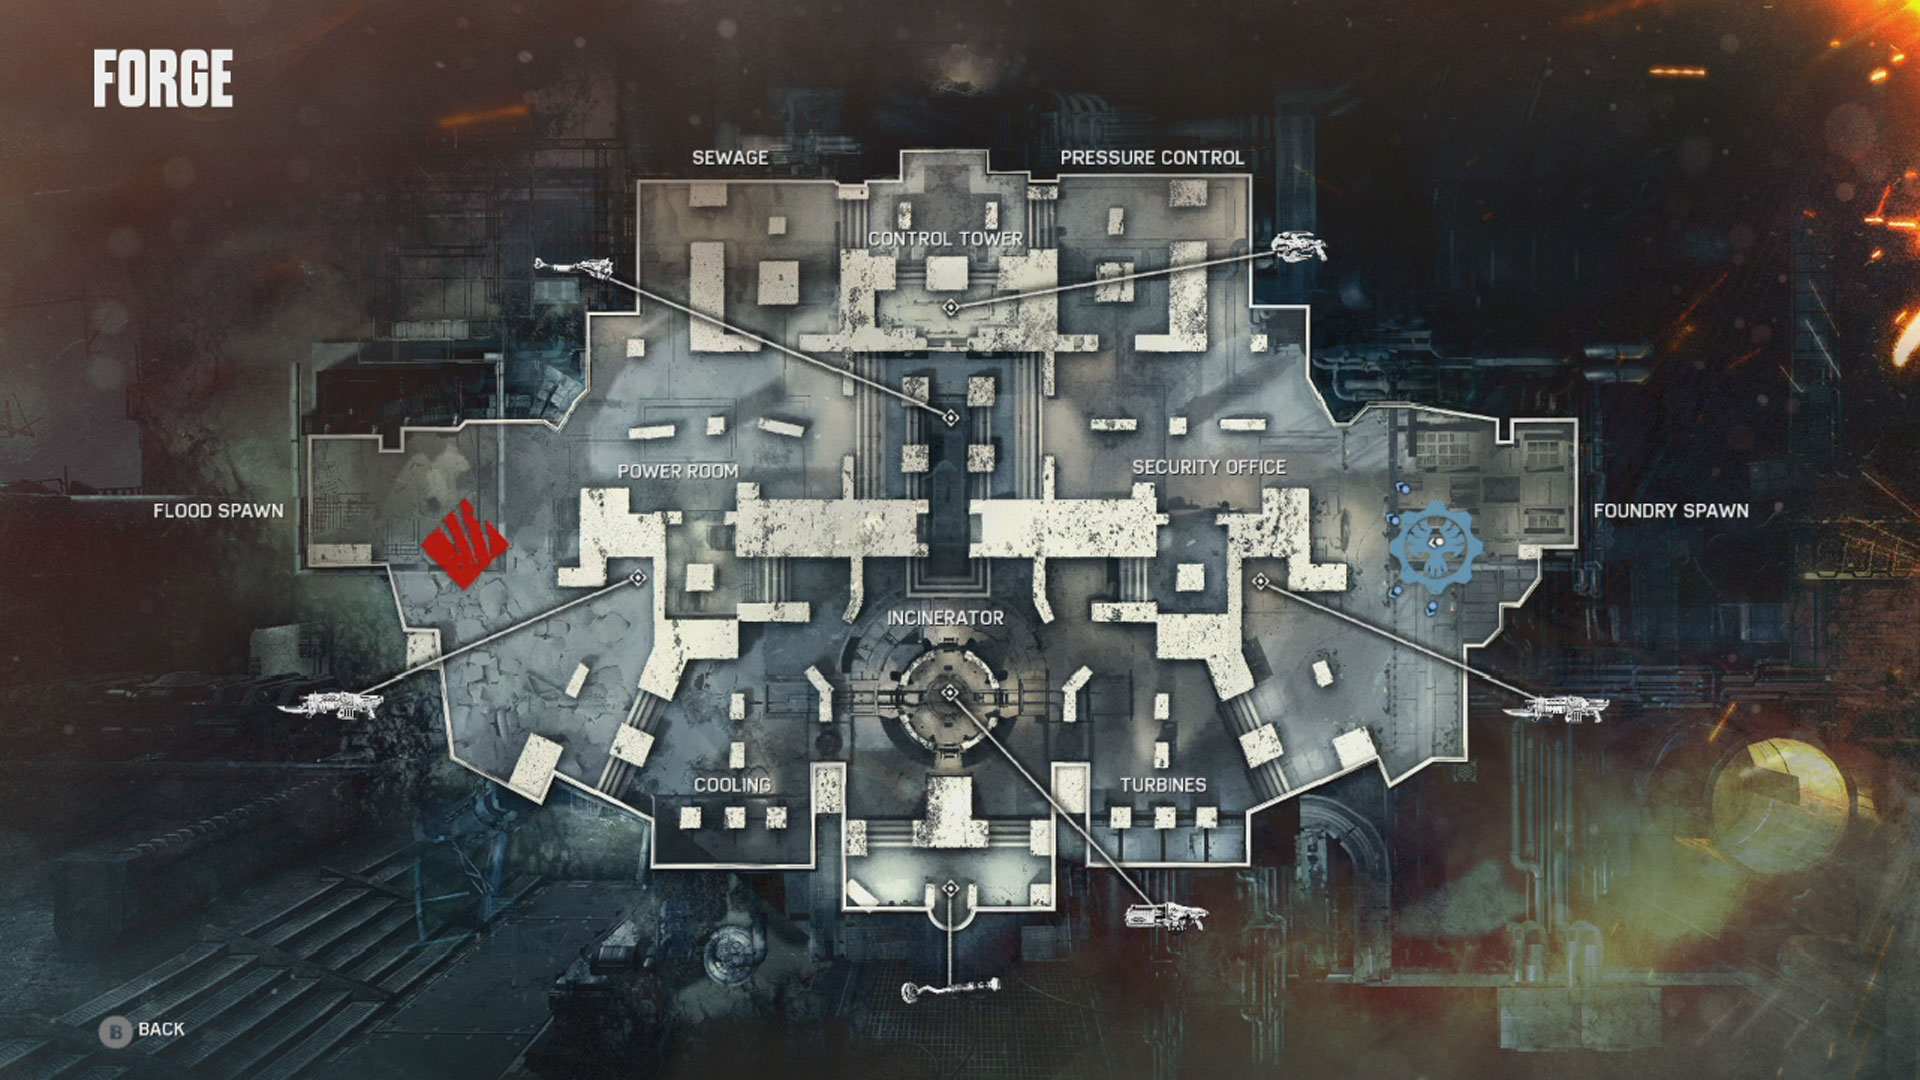 Gears of War 4 Forge Multiplayer Map